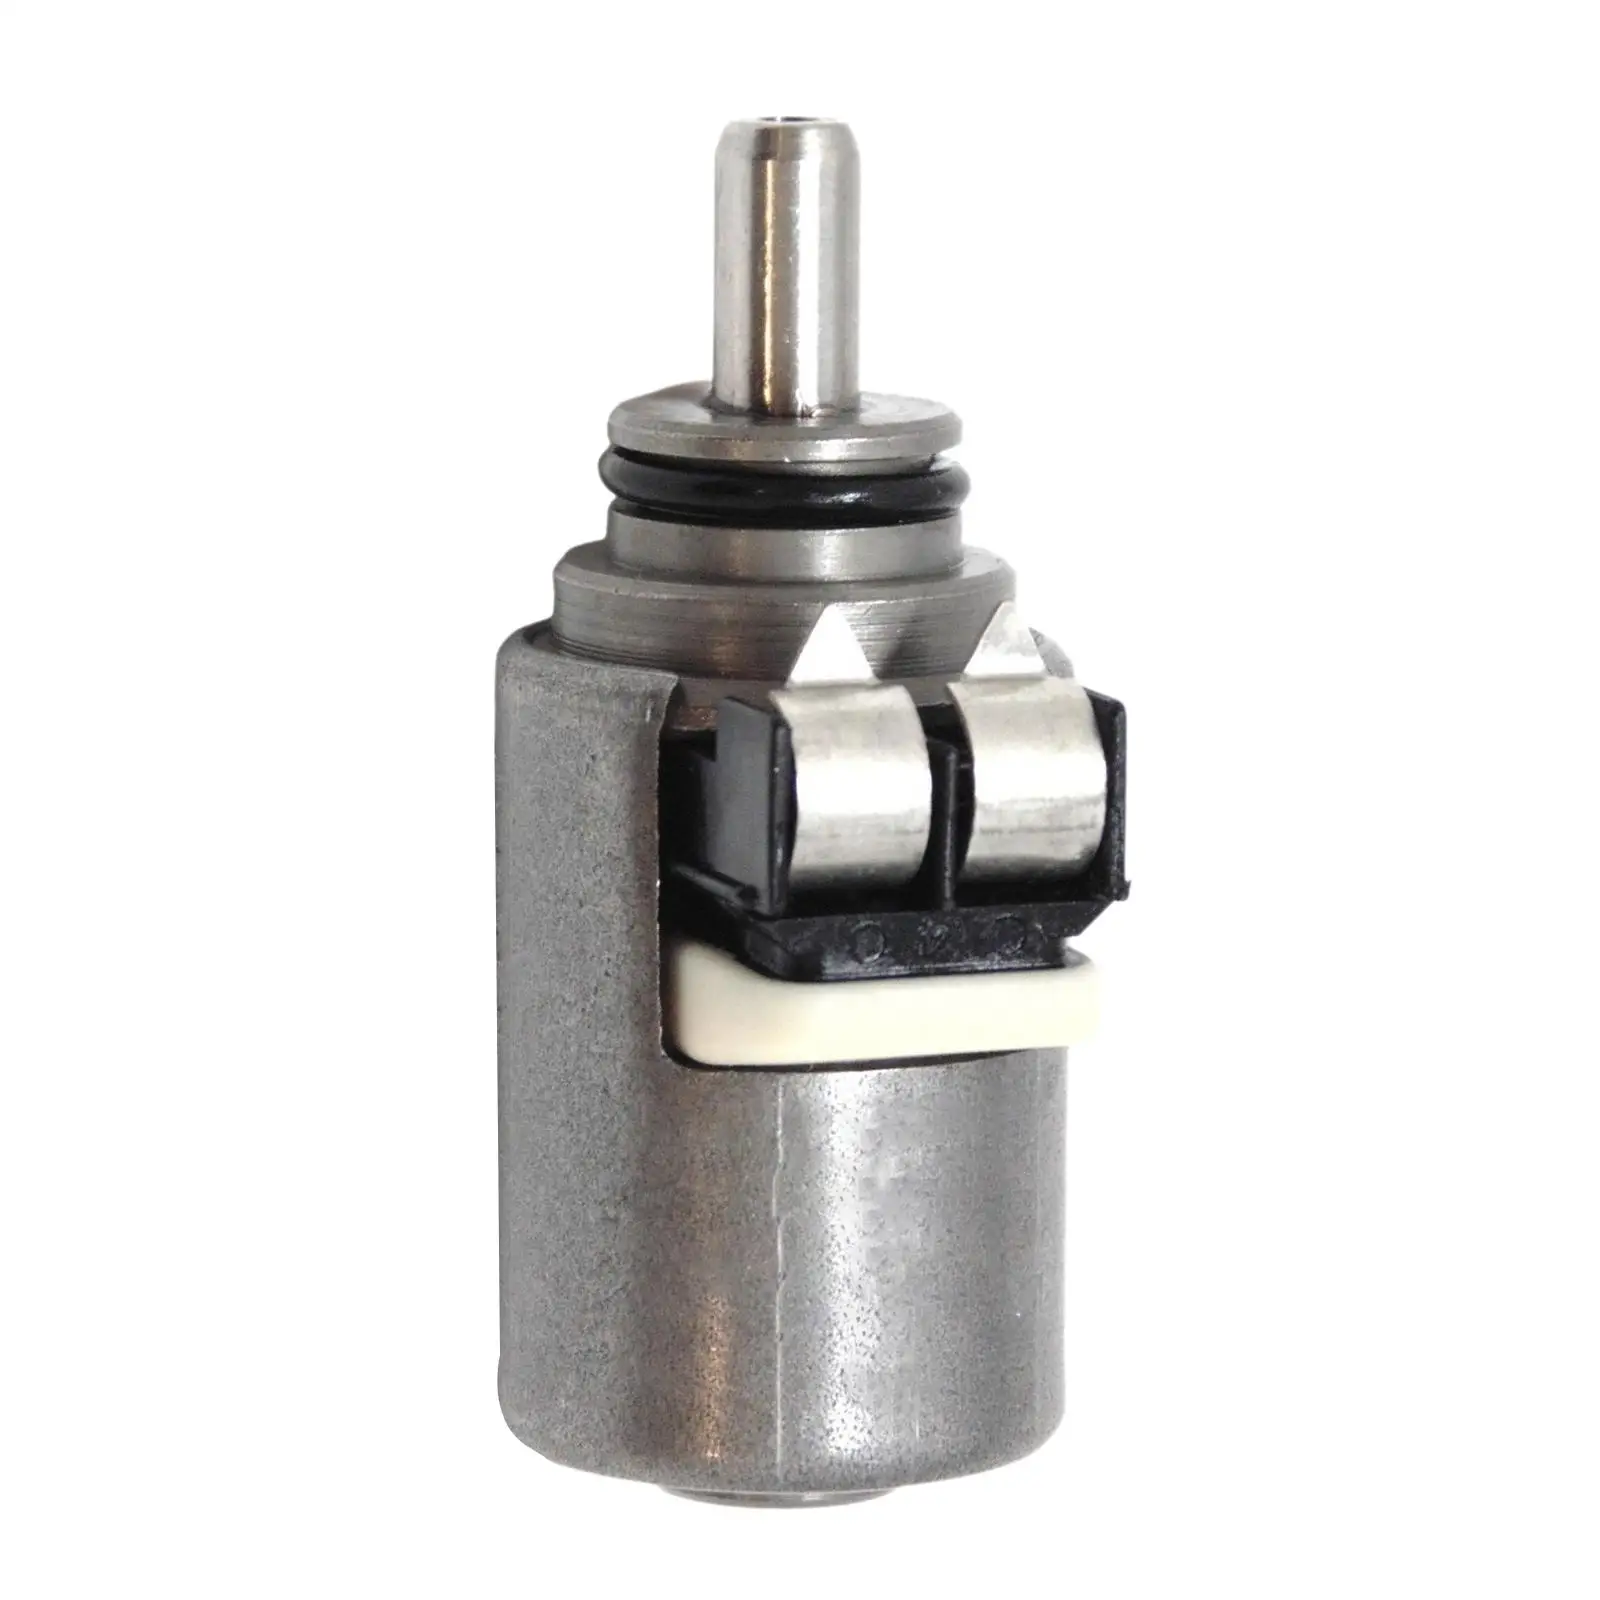 722.6 PWM Transmission Valve Solenoid Direct Replaces Easy Installation